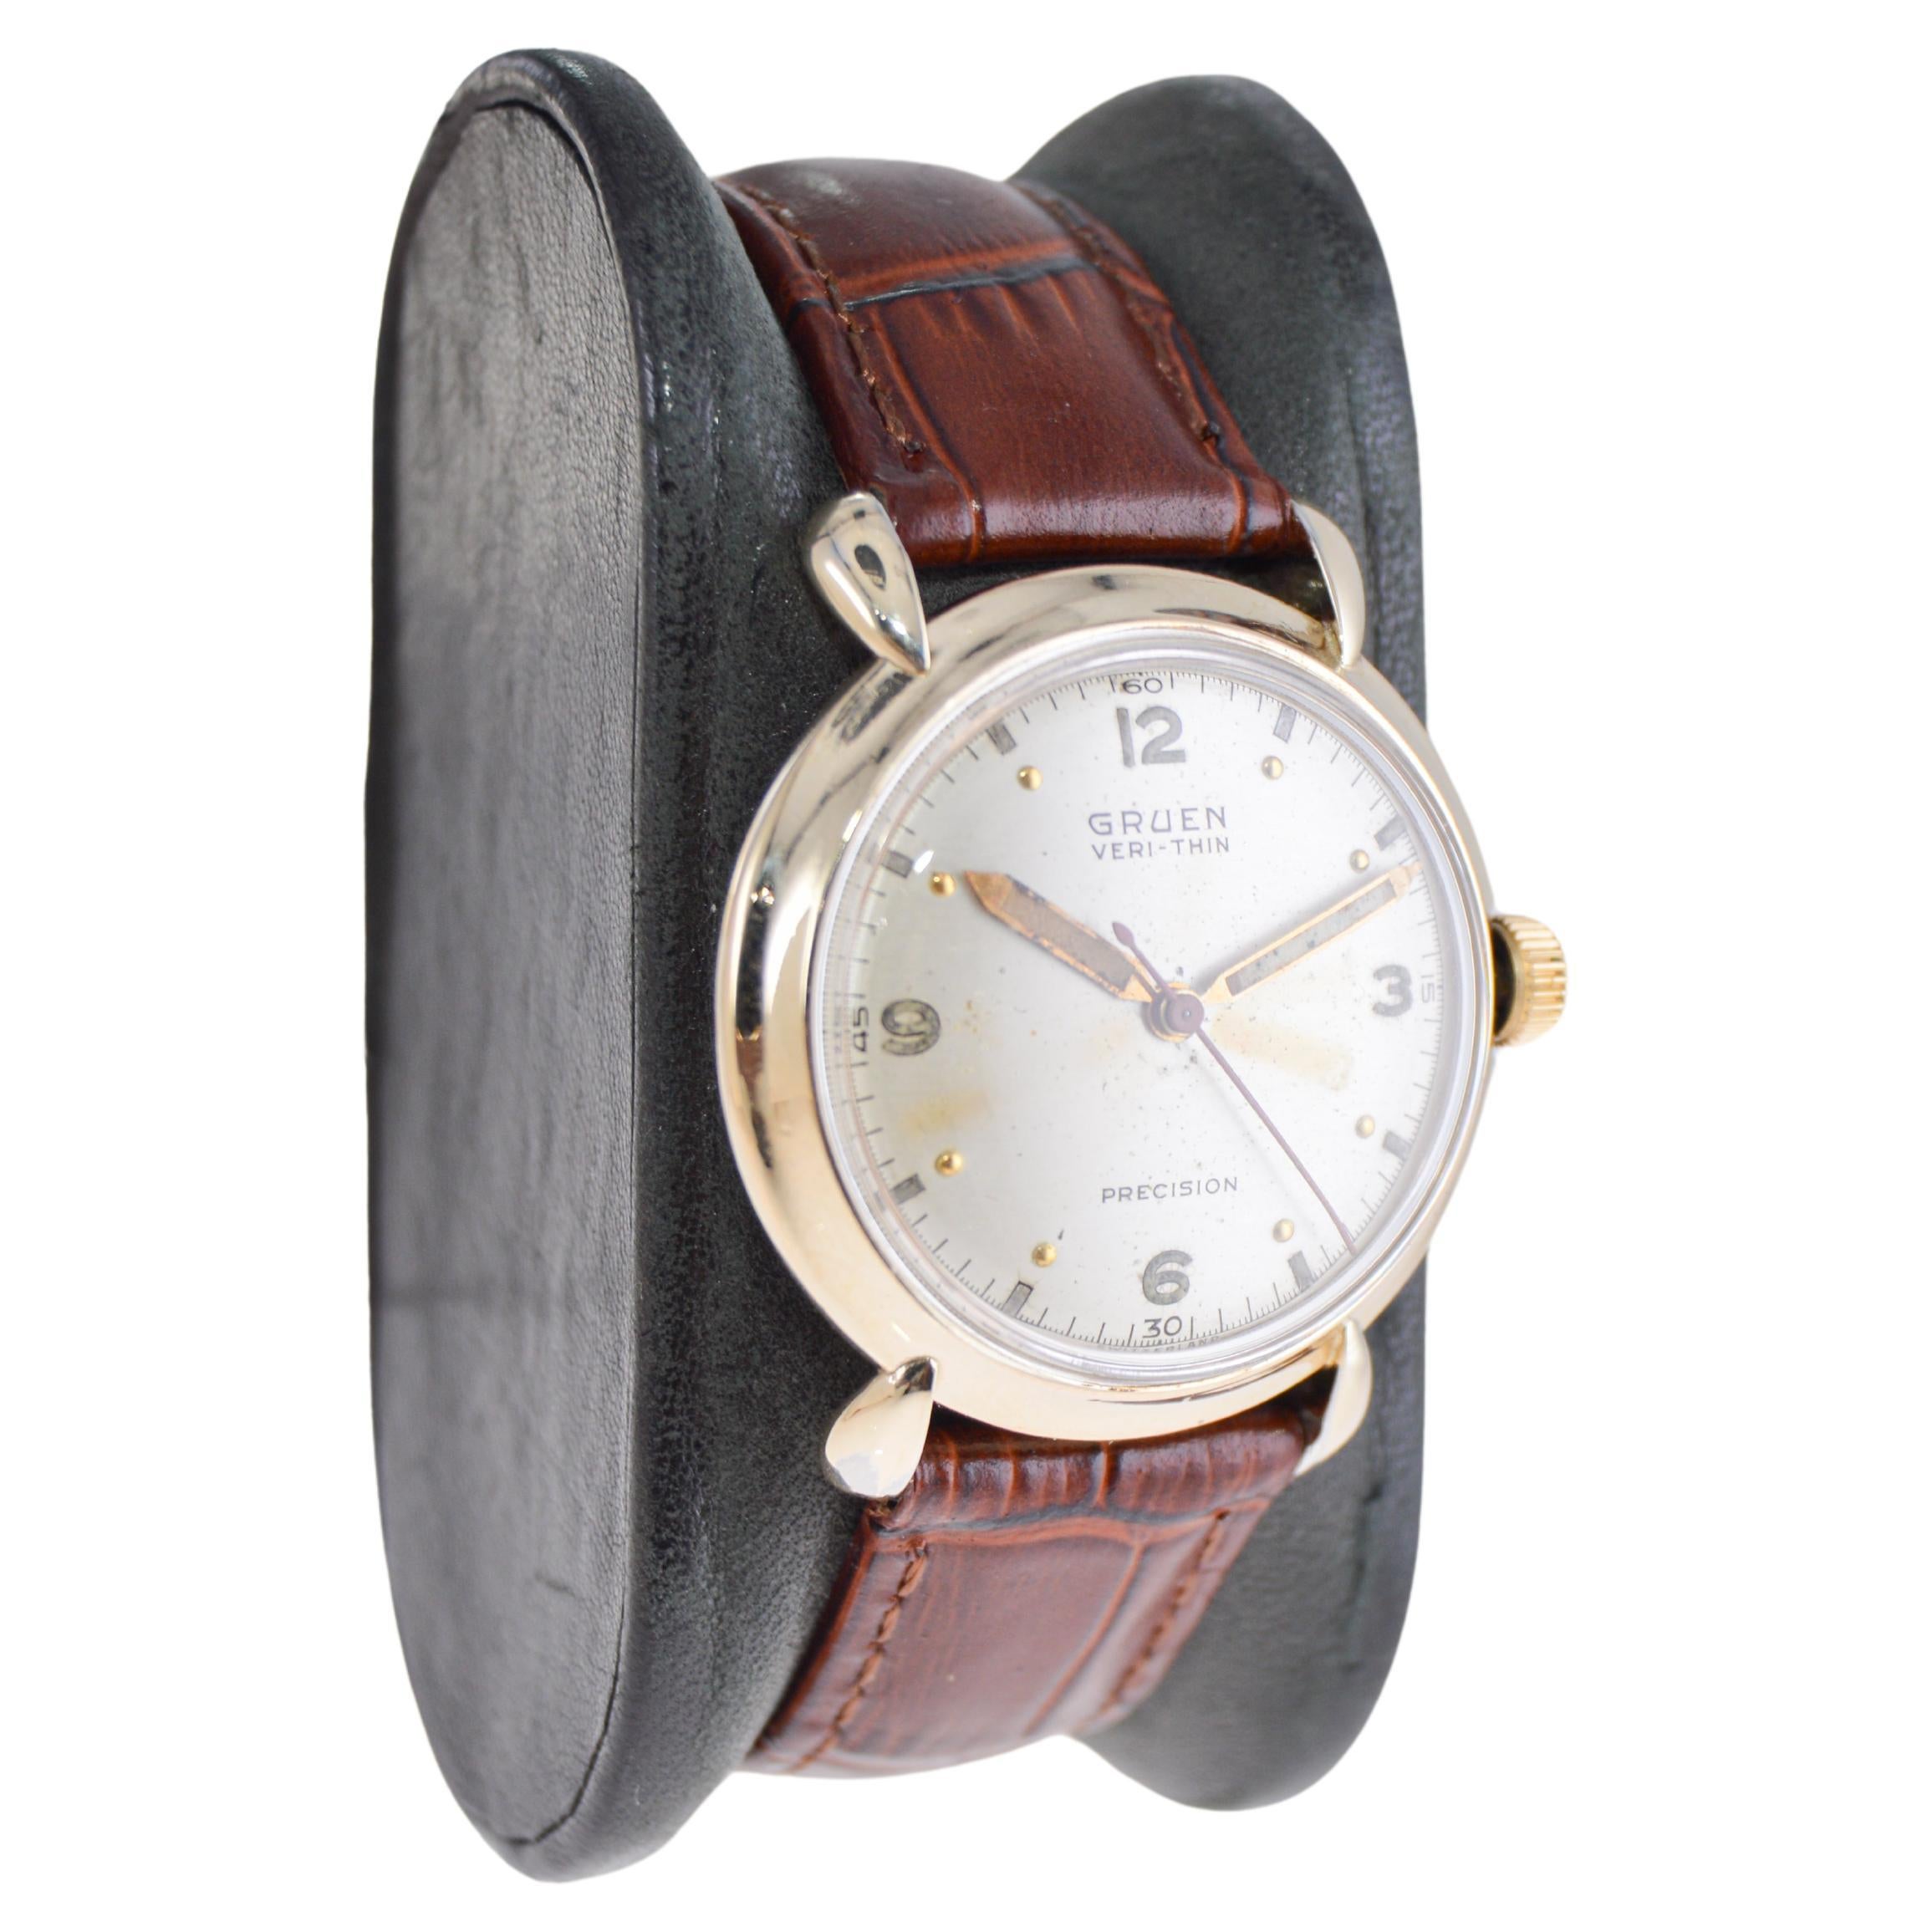 FACTORY / HOUSE: Gruen Watch Company
STYLE / REFERENCE: Art Deco / Round Teardrop Lugs
METAL / MATERIAL: Yellow Gold Filled 
CIRCA: 1940's
DIMENSIONS: Length 36mm X Diameter 31mm
MOVEMENT / CALIBER: Manual Winding / 17 Jewels 
DIAL / HANDS: Silvered